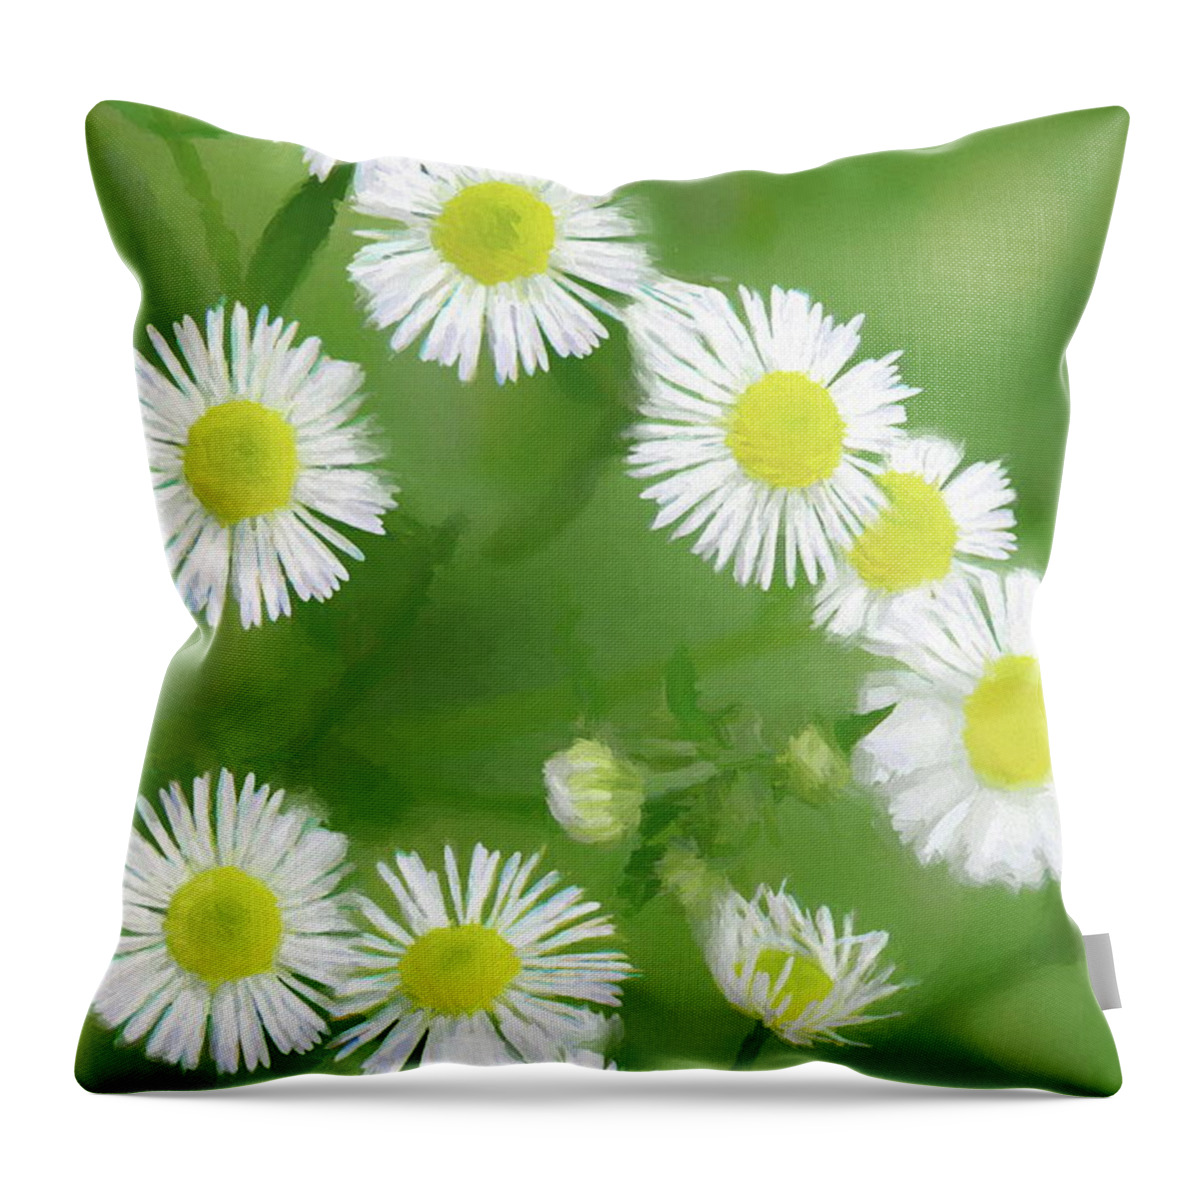 Daisy Throw Pillow featuring the photograph Daisies - Wild Flowers by Andrea Kollo